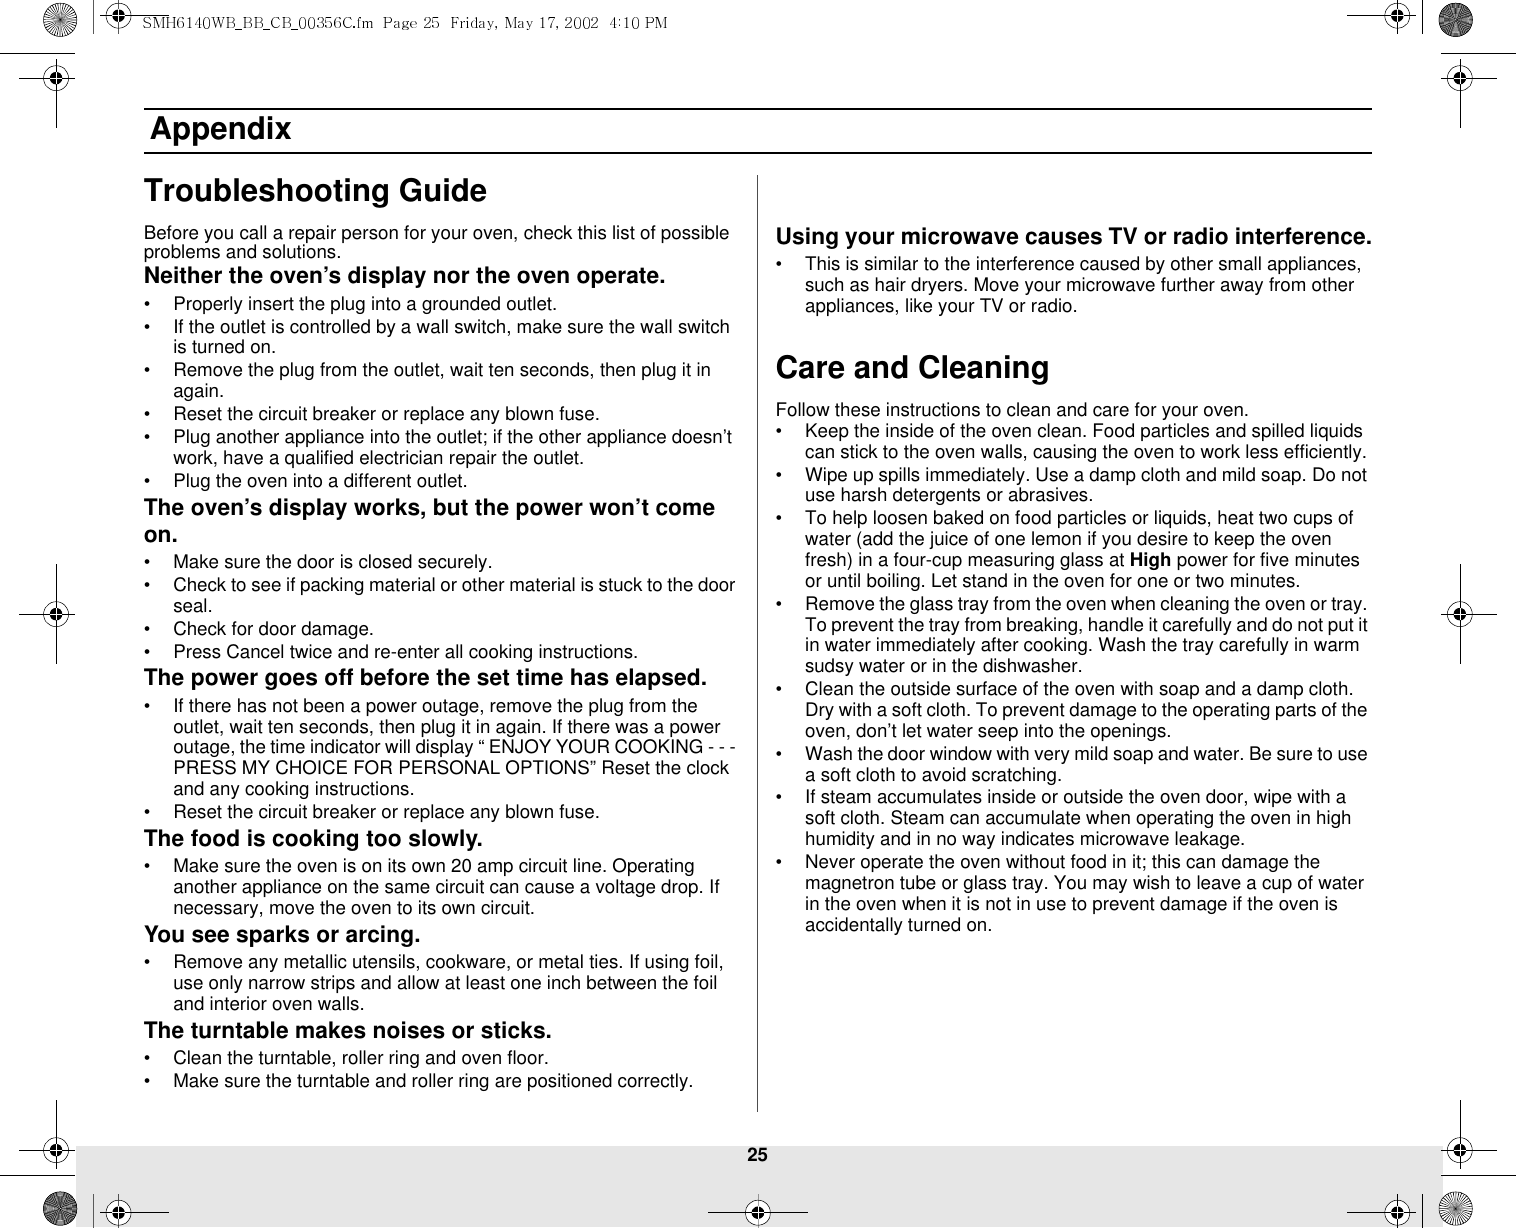 25 AppendixTroubleshooting GuideBefore you call a repair person for your oven, check this list of possible problems and solutions.Neither the oven’s display nor the oven operate.• Properly insert the plug into a grounded outlet. • If the outlet is controlled by a wall switch, make sure the wall switch is turned on. • Remove the plug from the outlet, wait ten seconds, then plug it in again. • Reset the circuit breaker or replace any blown fuse.• Plug another appliance into the outlet; if the other appliance doesn’t work, have a qualified electrician repair the outlet. • Plug the oven into a different outlet.The oven’s display works, but the power won’t come on.• Make sure the door is closed securely.• Check to see if packing material or other material is stuck to the door seal. • Check for door damage.• Press Cancel twice and re-enter all cooking instructions.The power goes off before the set time has elapsed.• If there has not been a power outage, remove the plug from the outlet, wait ten seconds, then plug it in again. If there was a power outage, the time indicator will display “ ENJOY YOUR COOKING - - - PRESS MY CHOICE FOR PERSONAL OPTIONS” Reset the clock and any cooking instructions. • Reset the circuit breaker or replace any blown fuse. The food is cooking too slowly.• Make sure the oven is on its own 20 amp circuit line. Operating another appliance on the same circuit can cause a voltage drop. If necessary, move the oven to its own circuit.You see sparks or arcing.• Remove any metallic utensils, cookware, or metal ties. If using foil, use only narrow strips and allow at least one inch between the foil and interior oven walls.The turntable makes noises or sticks.• Clean the turntable, roller ring and oven floor. • Make sure the turntable and roller ring are positioned correctly.Using your microwave causes TV or radio interference.• This is similar to the interference caused by other small appliances, such as hair dryers. Move your microwave further away from other appliances, like your TV or radio.Care and CleaningFollow these instructions to clean and care for your oven.• Keep the inside of the oven clean. Food particles and spilled liquids can stick to the oven walls, causing the oven to work less efficiently.• Wipe up spills immediately. Use a damp cloth and mild soap. Do not use harsh detergents or abrasives. • To help loosen baked on food particles or liquids, heat two cups of water (add the juice of one lemon if you desire to keep the oven fresh) in a four-cup measuring glass at High power for five minutes or until boiling. Let stand in the oven for one or two minutes. • Remove the glass tray from the oven when cleaning the oven or tray. To prevent the tray from breaking, handle it carefully and do not put it in water immediately after cooking. Wash the tray carefully in warm sudsy water or in the dishwasher. • Clean the outside surface of the oven with soap and a damp cloth. Dry with a soft cloth. To prevent damage to the operating parts of the oven, don’t let water seep into the openings.• Wash the door window with very mild soap and water. Be sure to use a soft cloth to avoid scratching.• If steam accumulates inside or outside the oven door, wipe with a soft cloth. Steam can accumulate when operating the oven in high humidity and in no way indicates microwave leakage.• Never operate the oven without food in it; this can damage the magnetron tube or glass tray. You may wish to leave a cup of water in the oven when it is not in use to prevent damage if the oven is accidentally turned on.